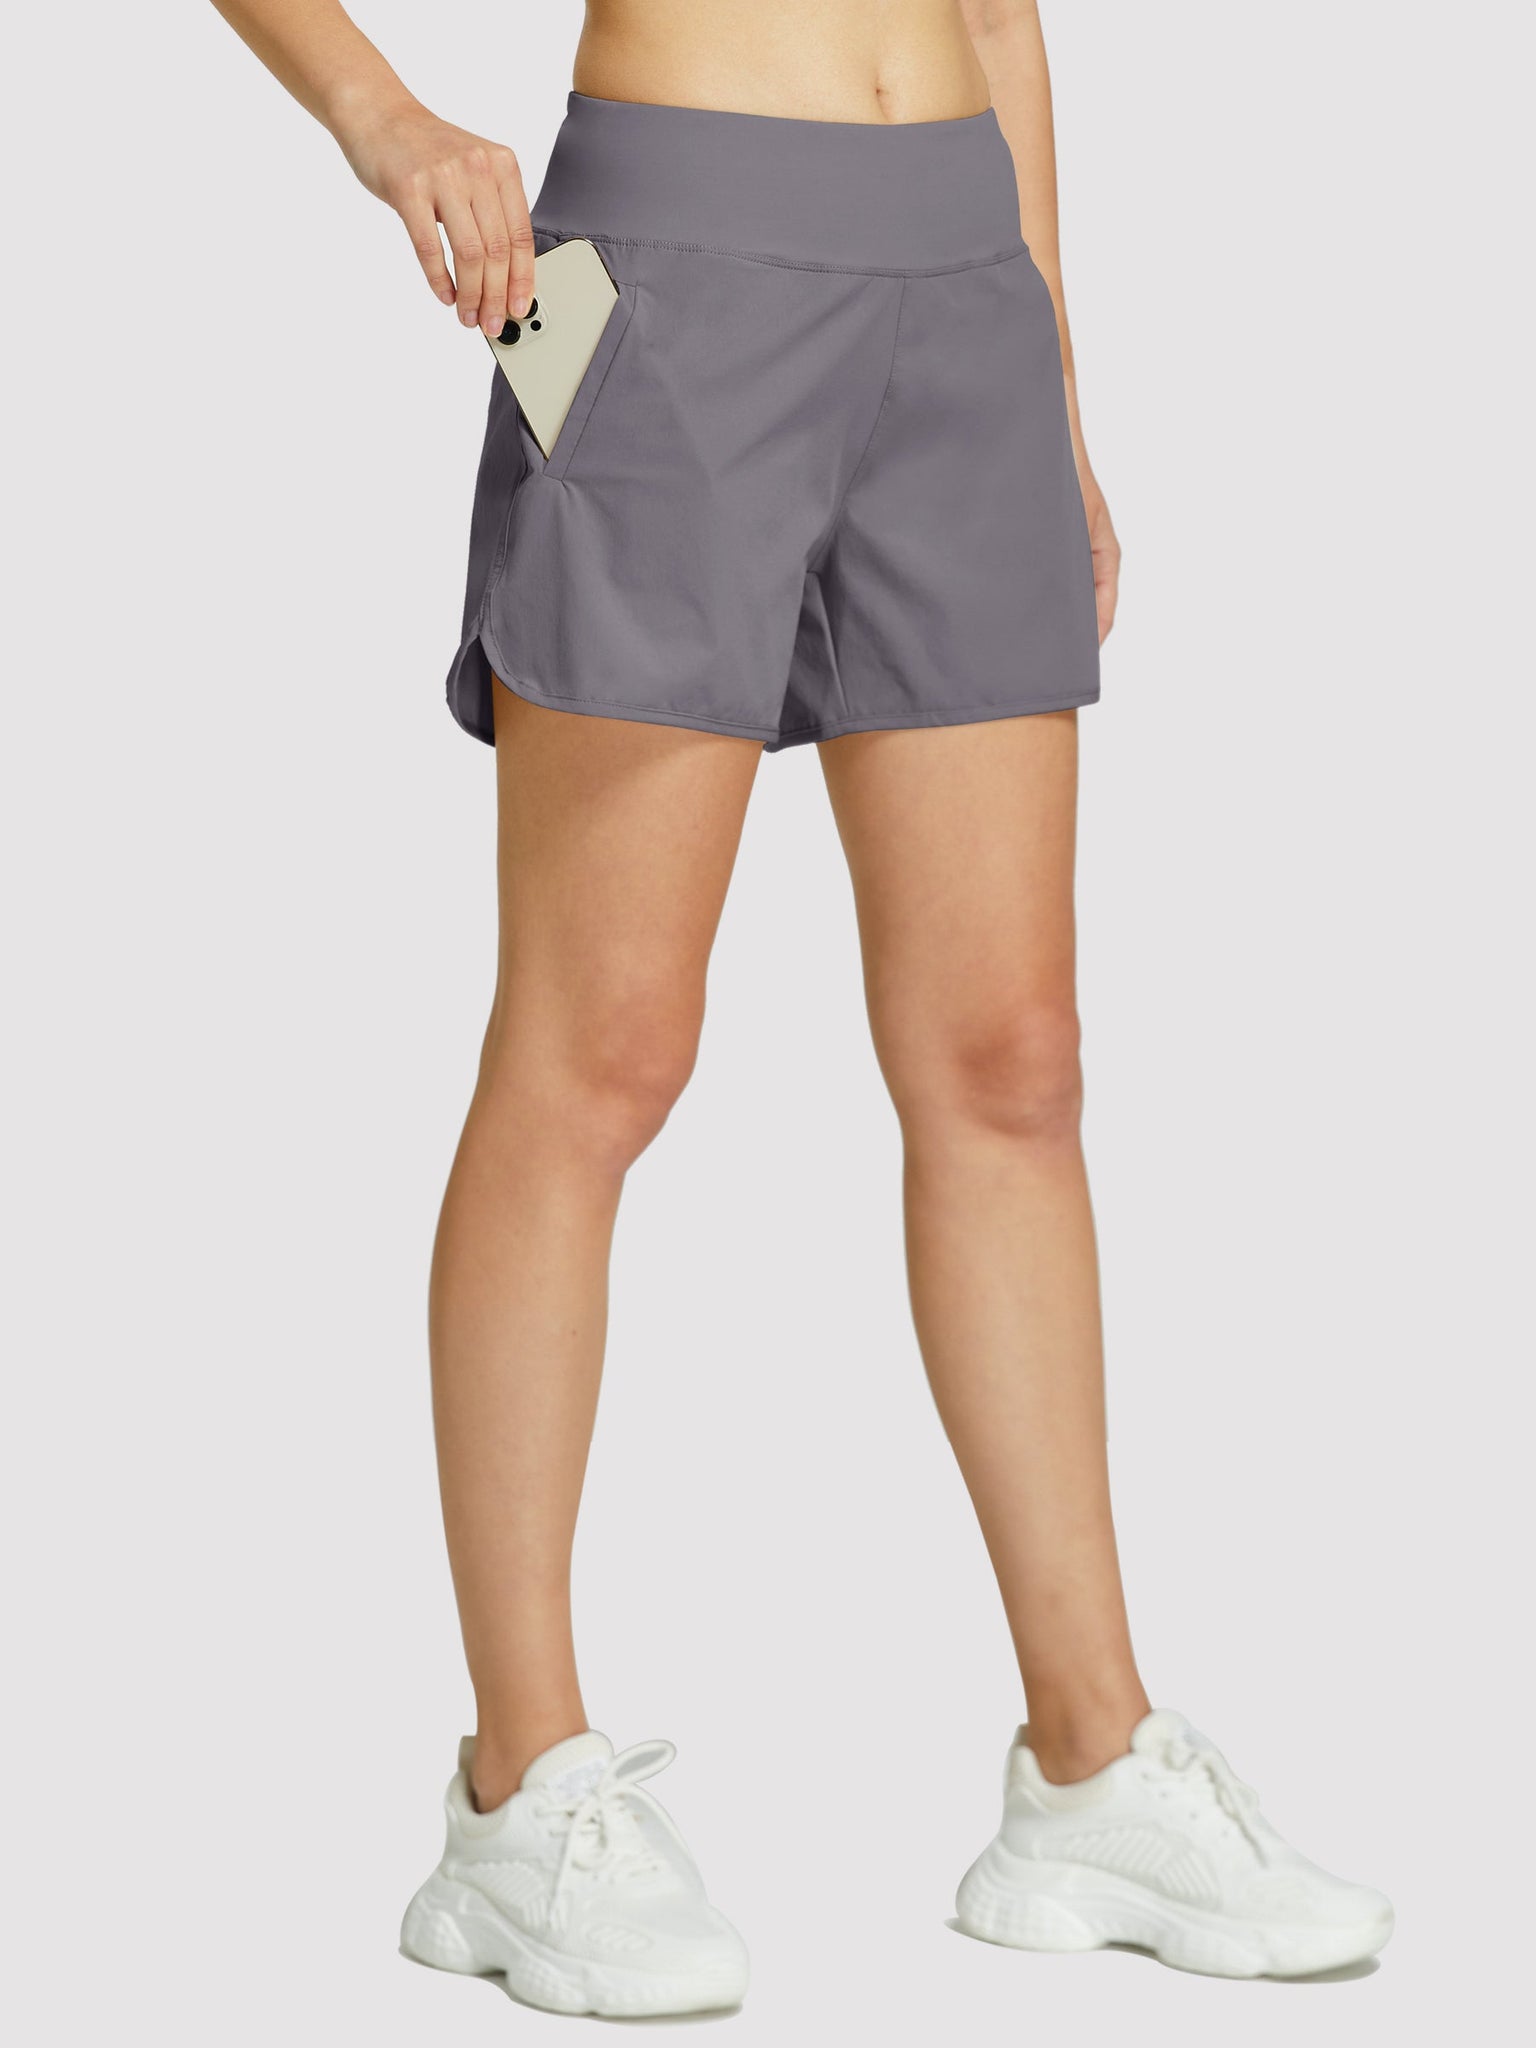 Womens High Rise Running Athletic Shorts_Gray2